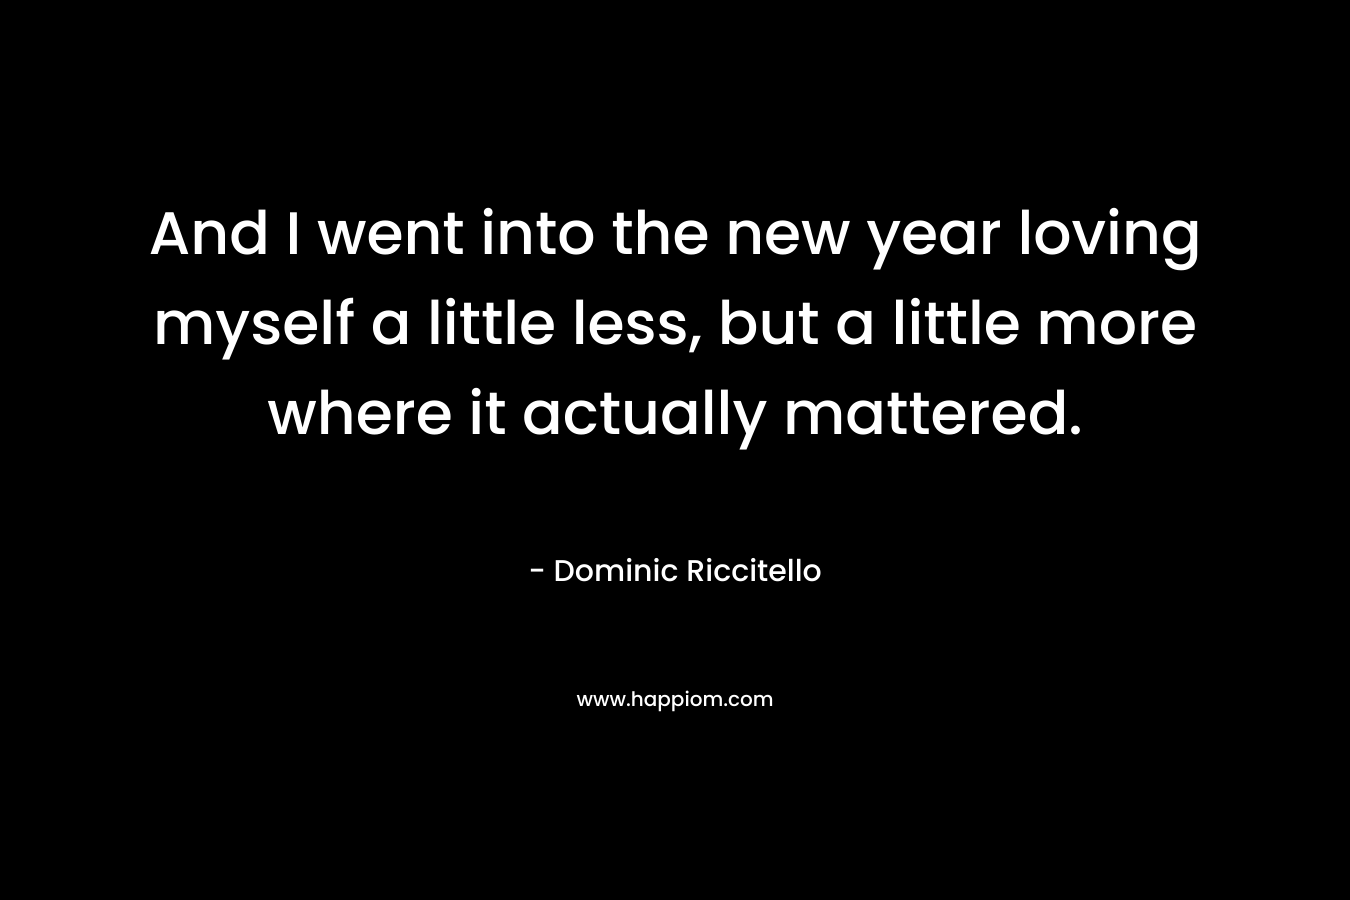 And I went into the new year loving myself a little less, but a little more where it actually mattered. – Dominic Riccitello